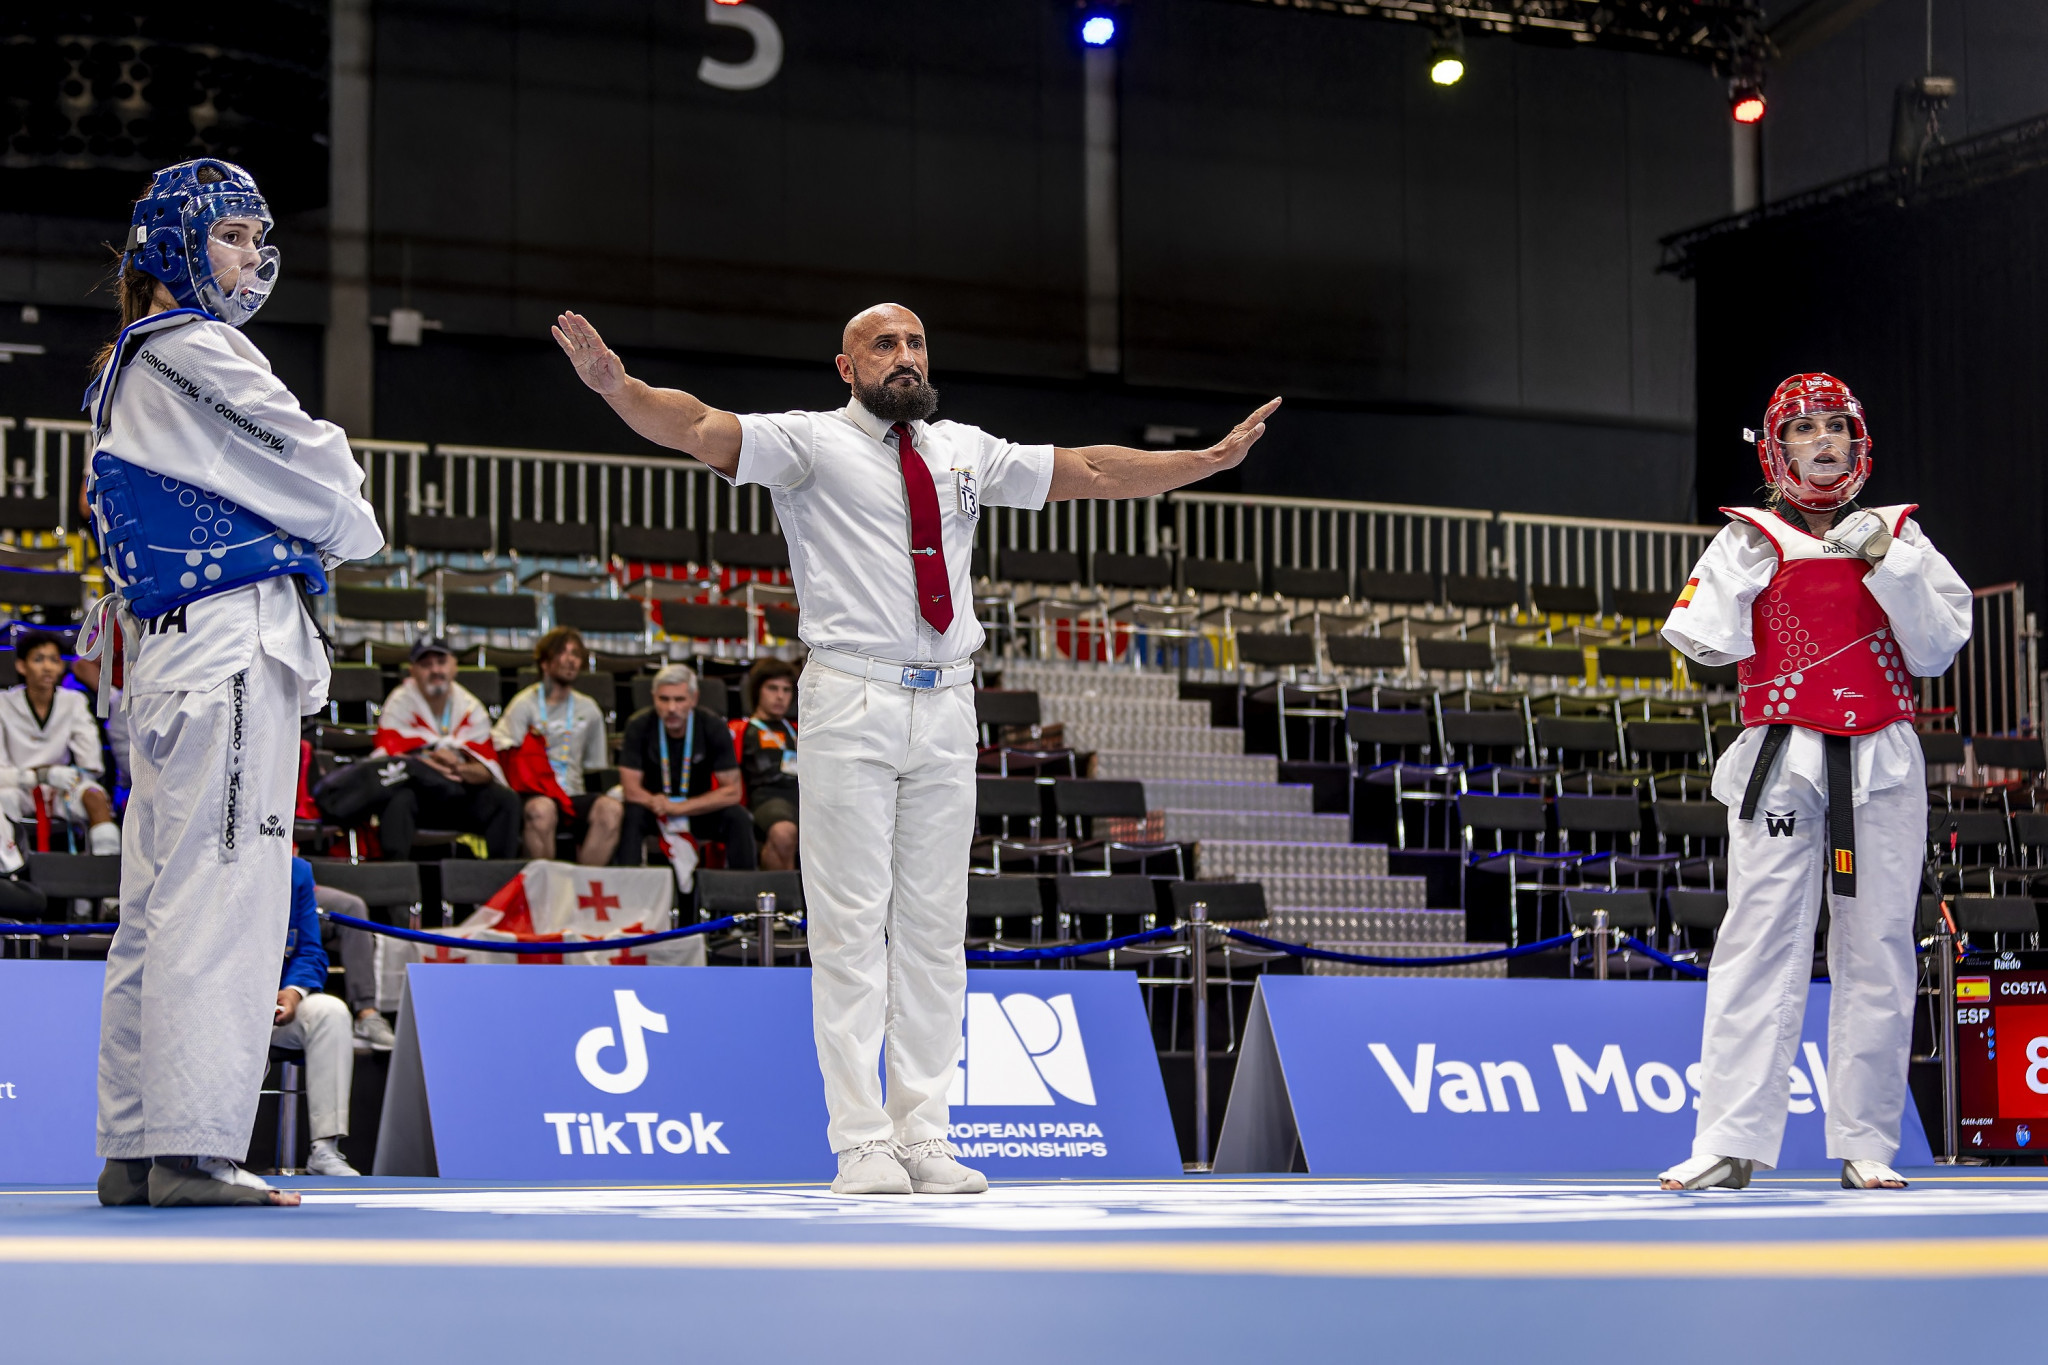 The Rotterdam Ahoy played host to the opening day of Para taekwondo action ©EPC